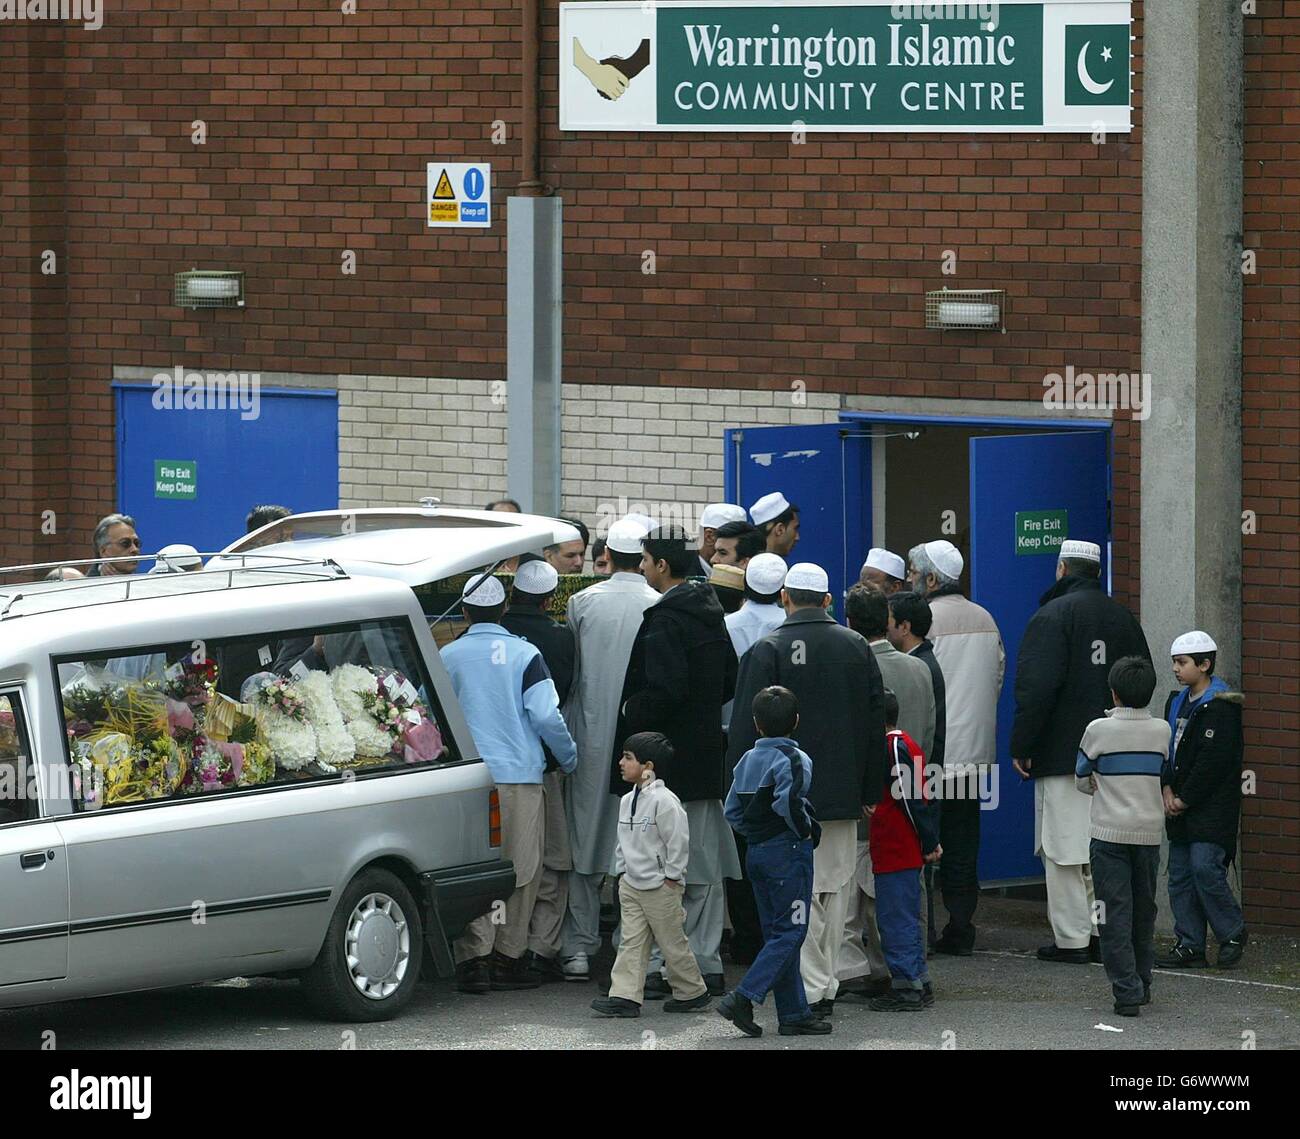 The coffin of Shafika Ahmed arrives at the Warrington Islamic Community Centre in Cheshire. The body of the murdered 17-year-old from Warrington was found dumped in the River Kent at Sedgwick, Cumbria, early in February. Shafilea went missing in September last year after a family holiday to Pakistan, where she drank bleach after being introduced to an arranged marriage suitor. Shafilea's father Iftikhar and mother Farzana are currently on police bail after they were arrested in December on suspicion of kidnap, with both denying any involvement in her death. Stock Photo